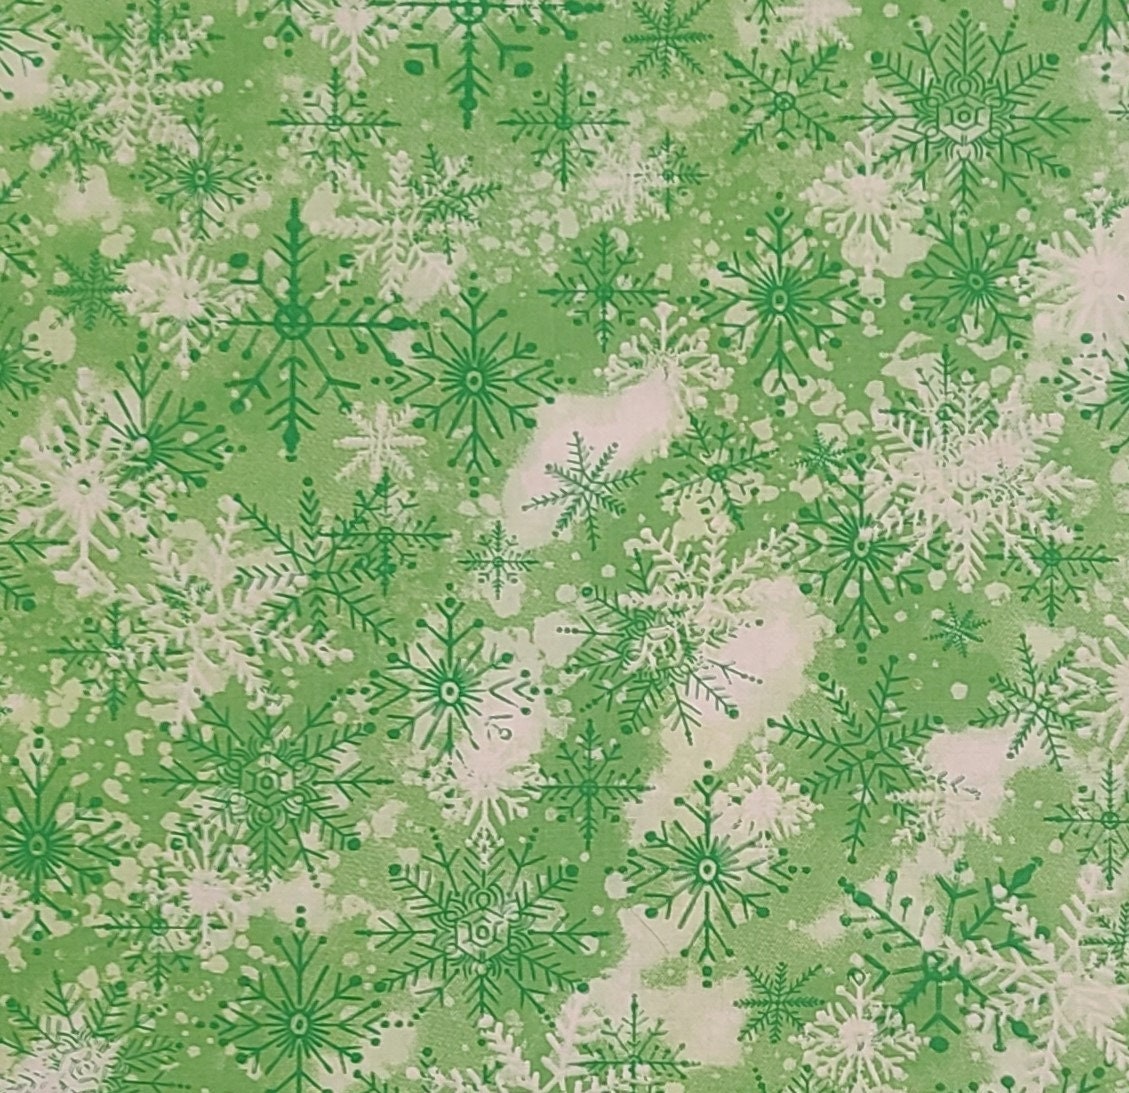 Designed Exclusively for Joann - White and Bright Green Tonal Fabric / Green and White Snowflake Pattern